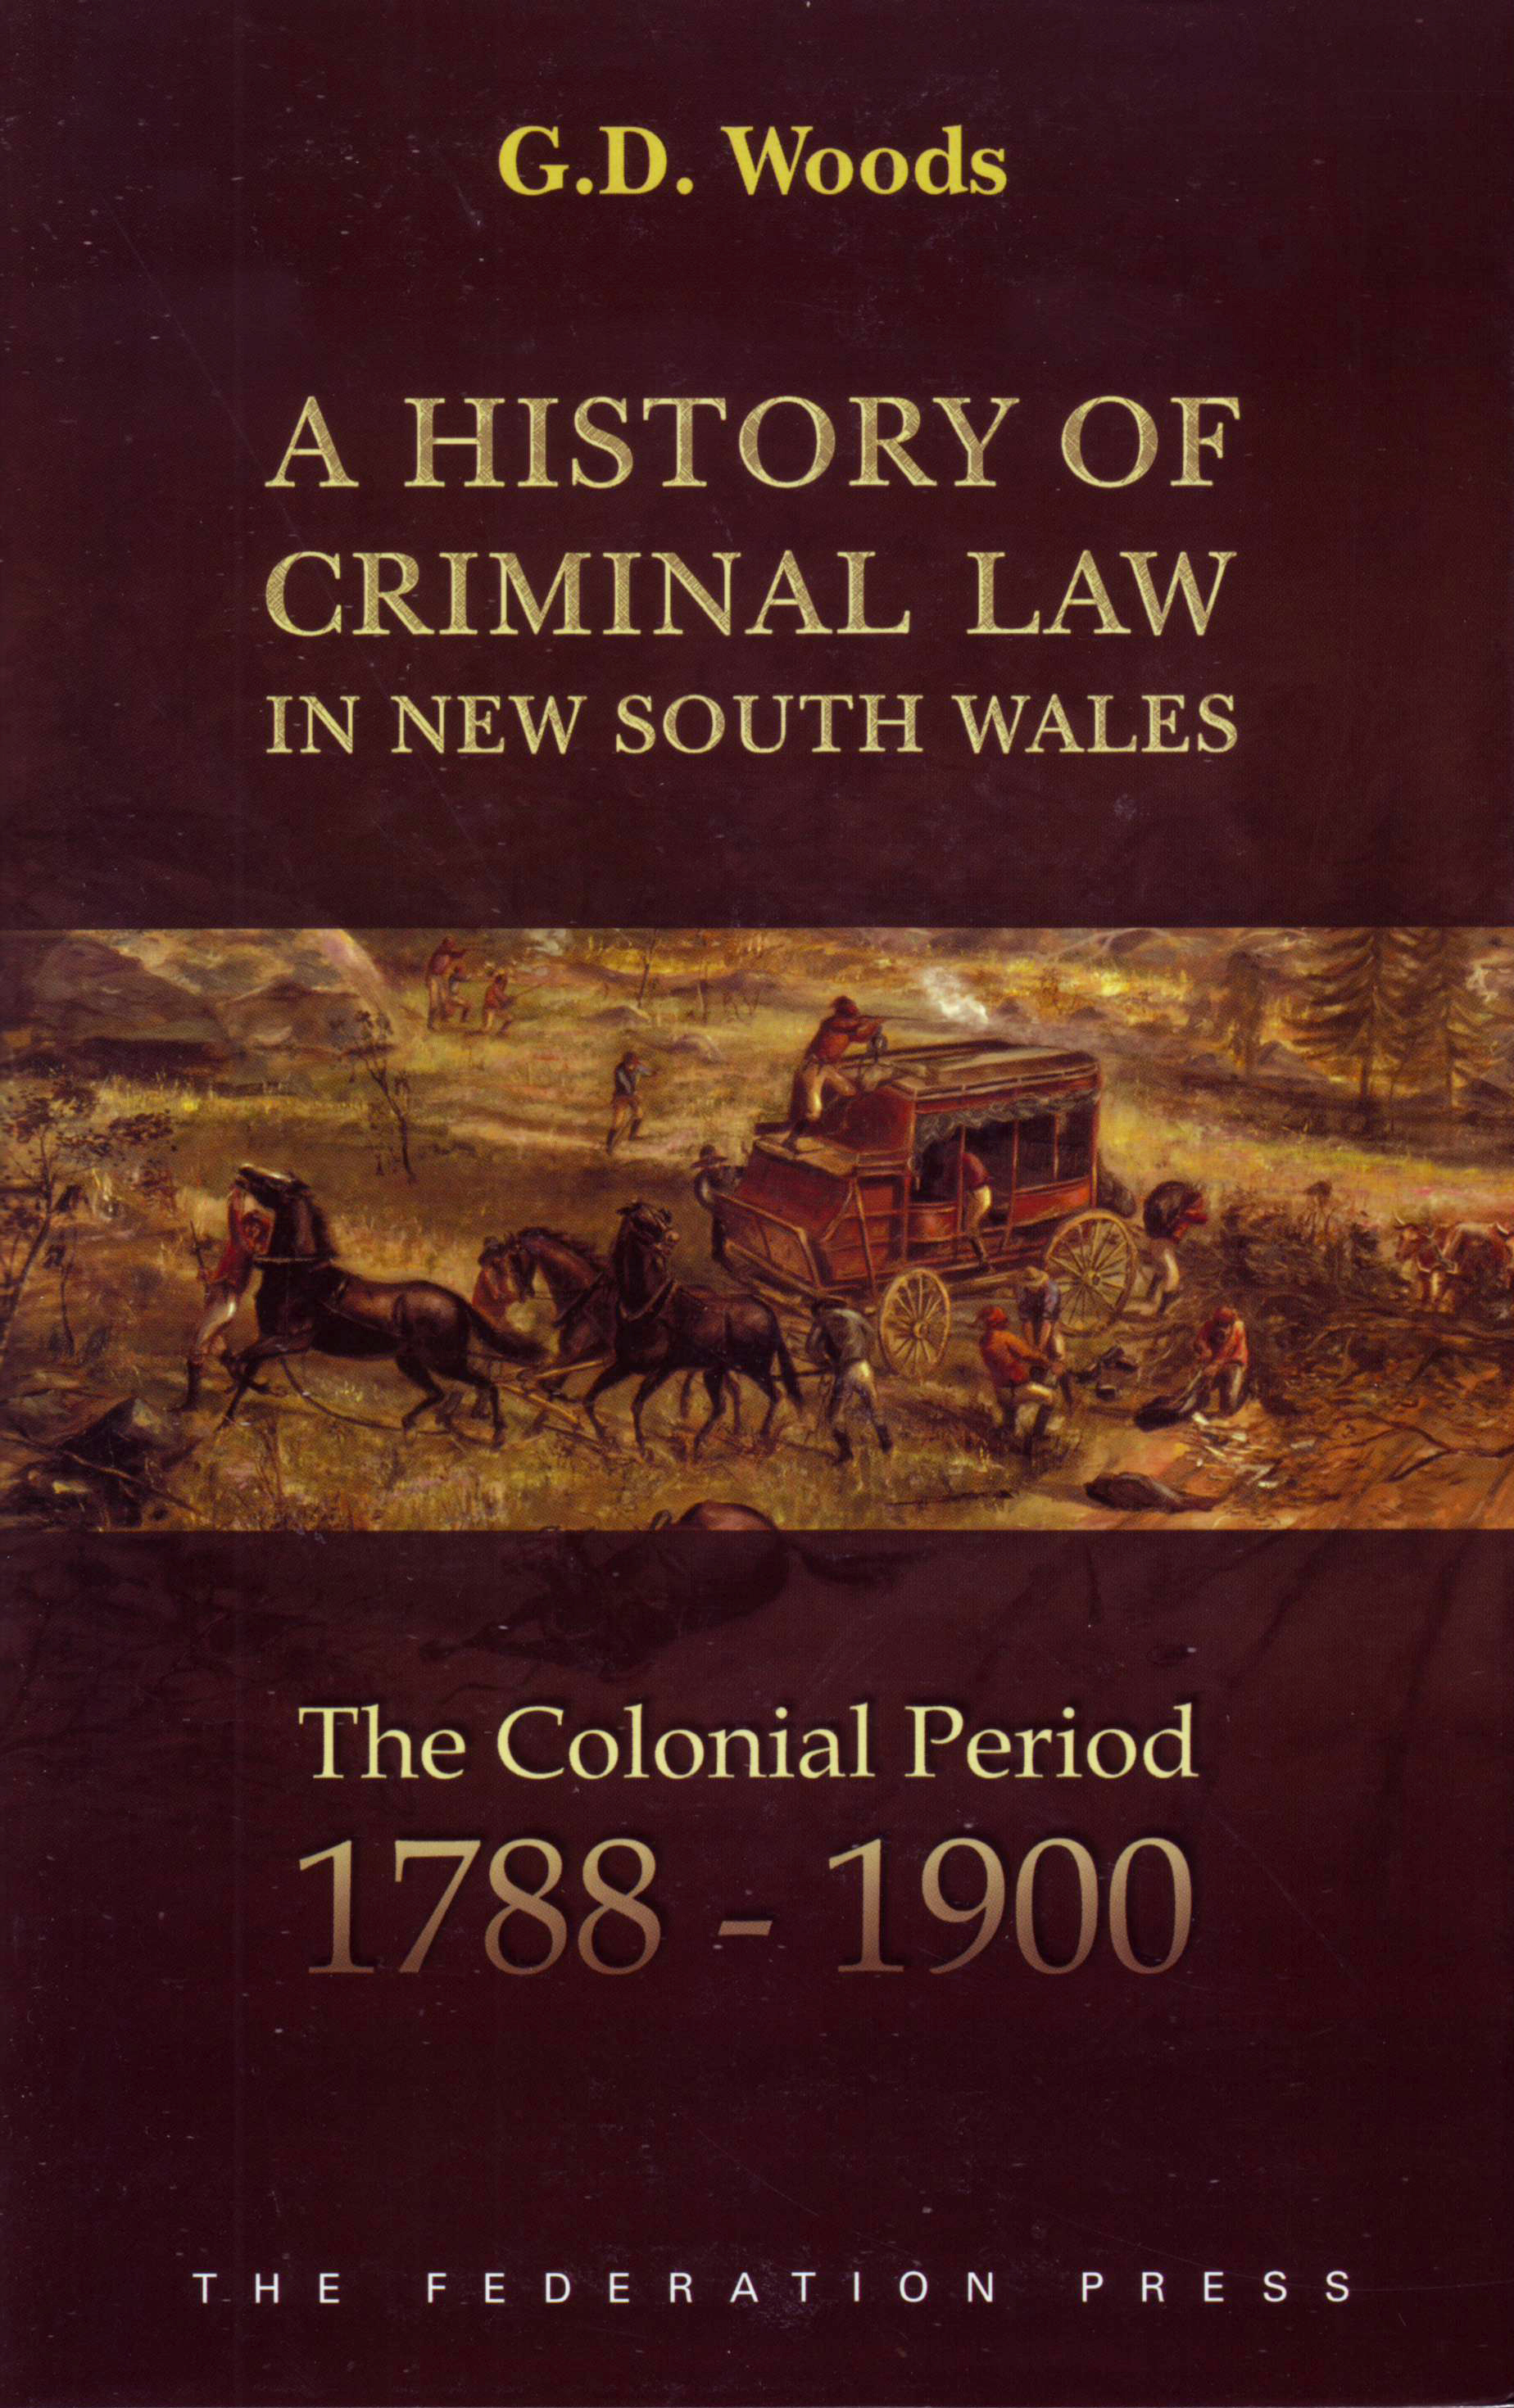 A History of Criminal Law in New South Wales - Volume 1: The